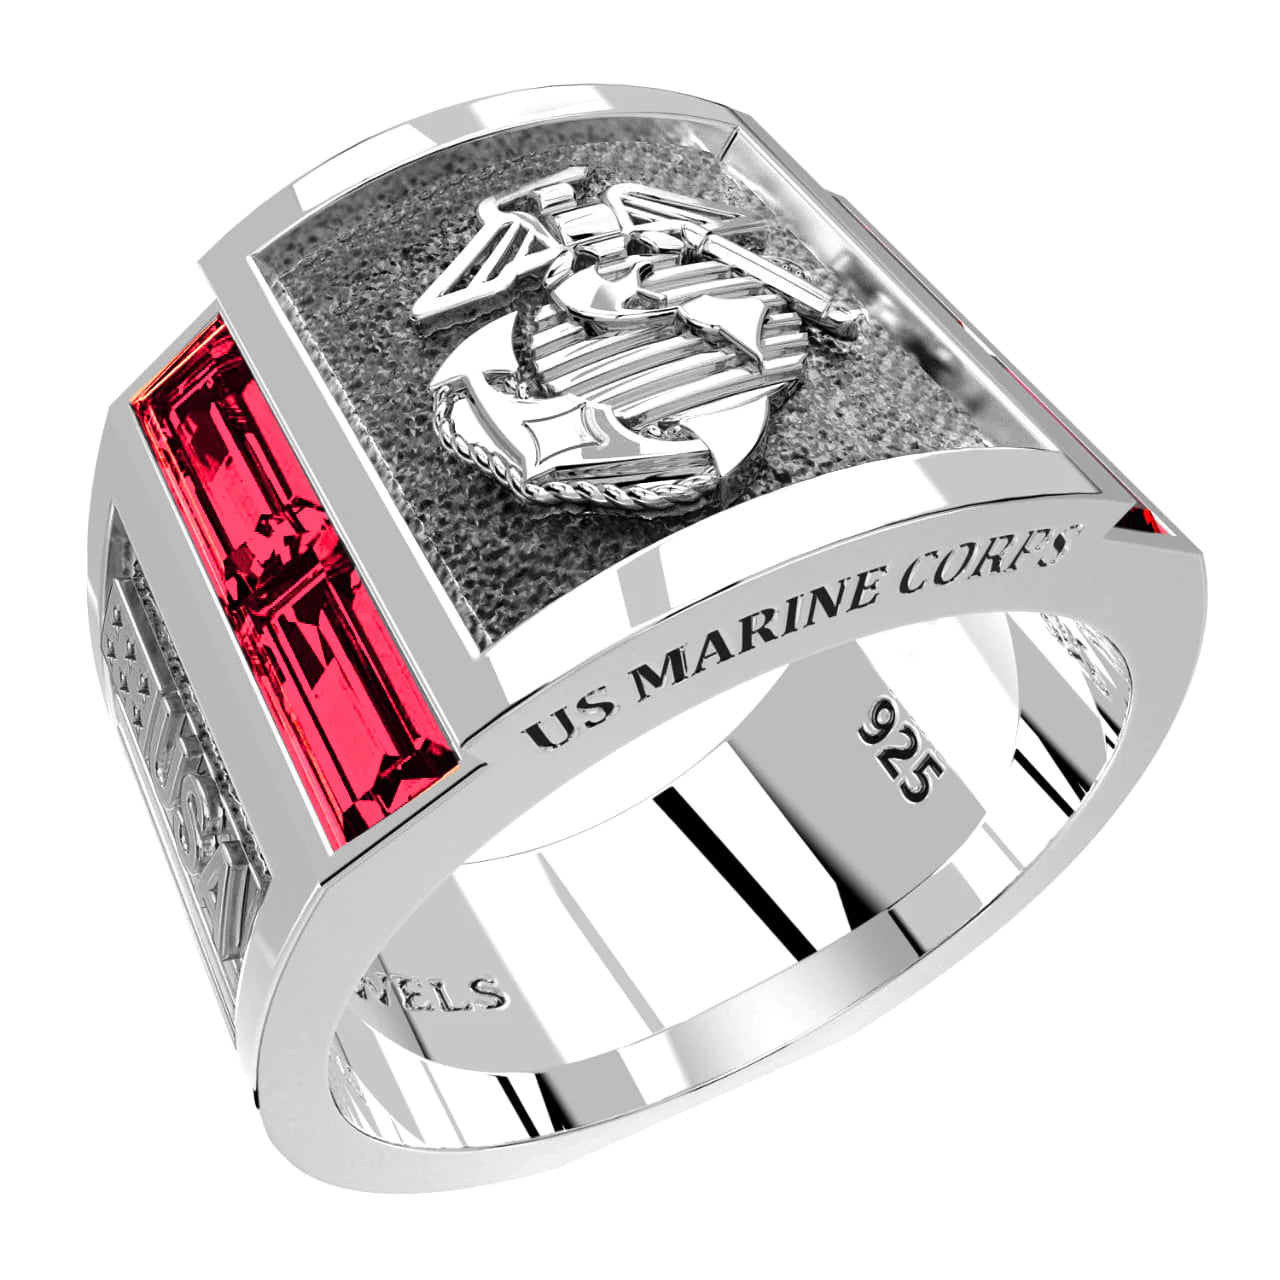 Men's 925 Sterling Silver Synthetic Rubies US Marine Corps USMC Ring